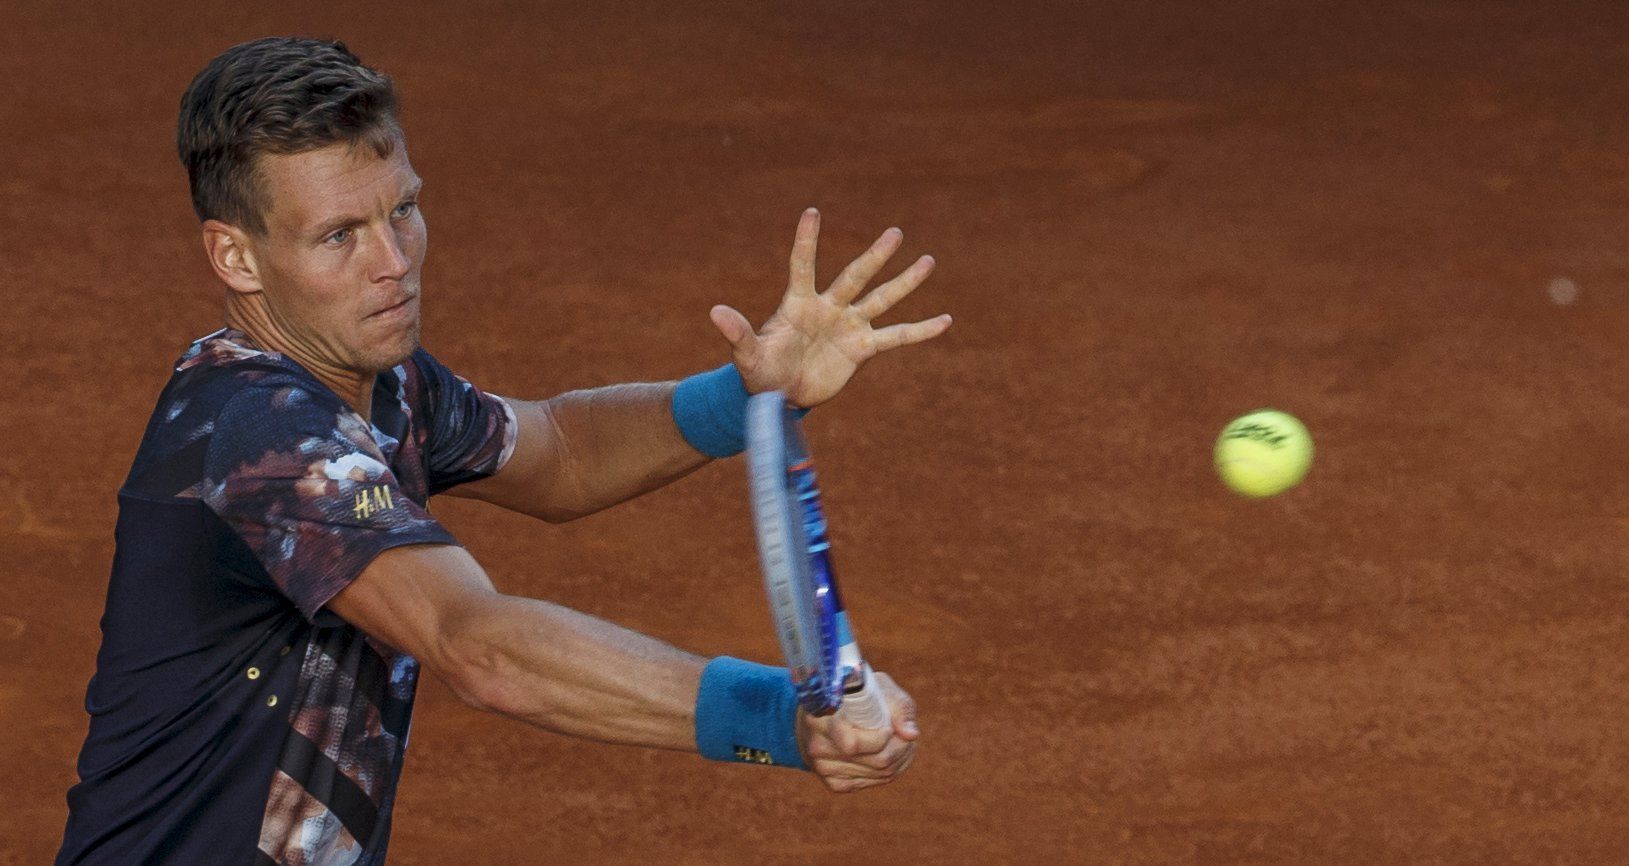 Berdych of the Czech Republic returns a forehand to Isner of the U.S. during their quarterfinal match at the Madrid Open tennis tournament in Madrid